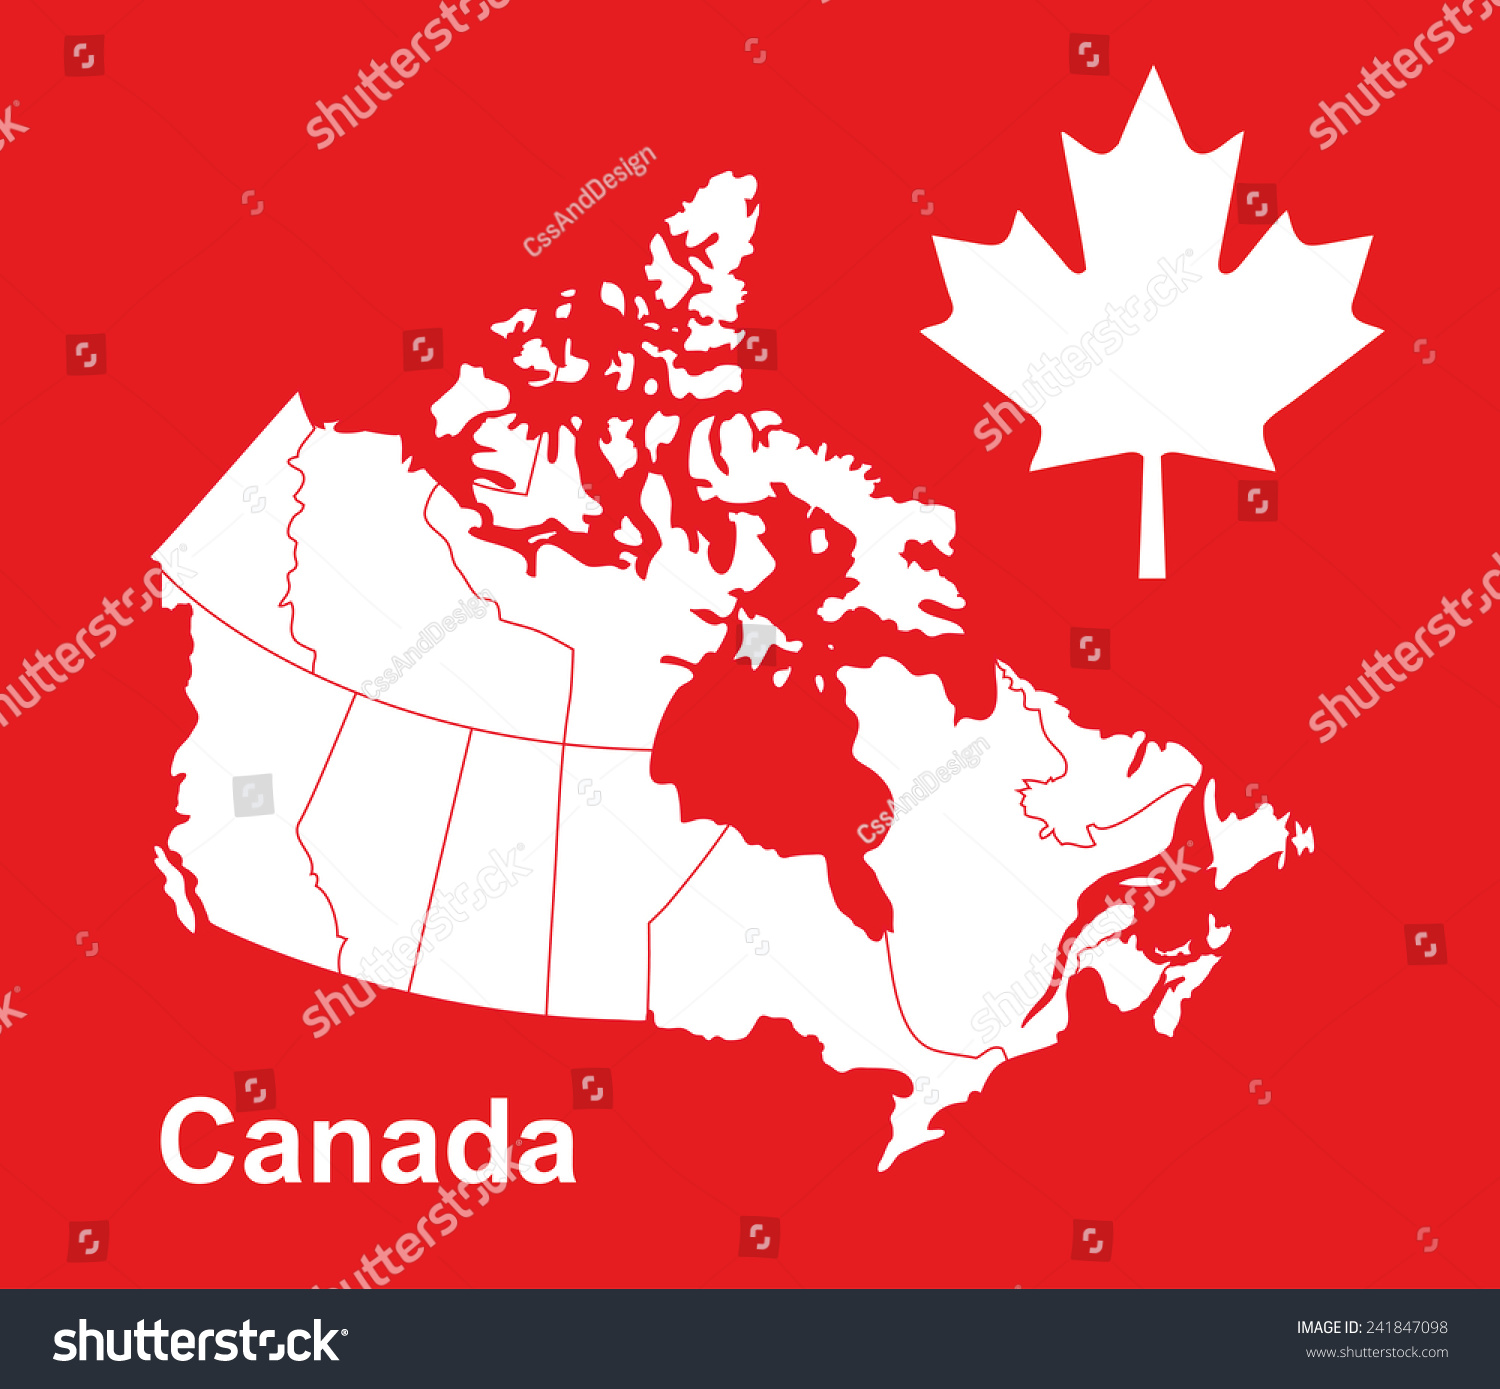 Canada Map Red Background Canada Map Stock Vector (Royalty Free) 241847098